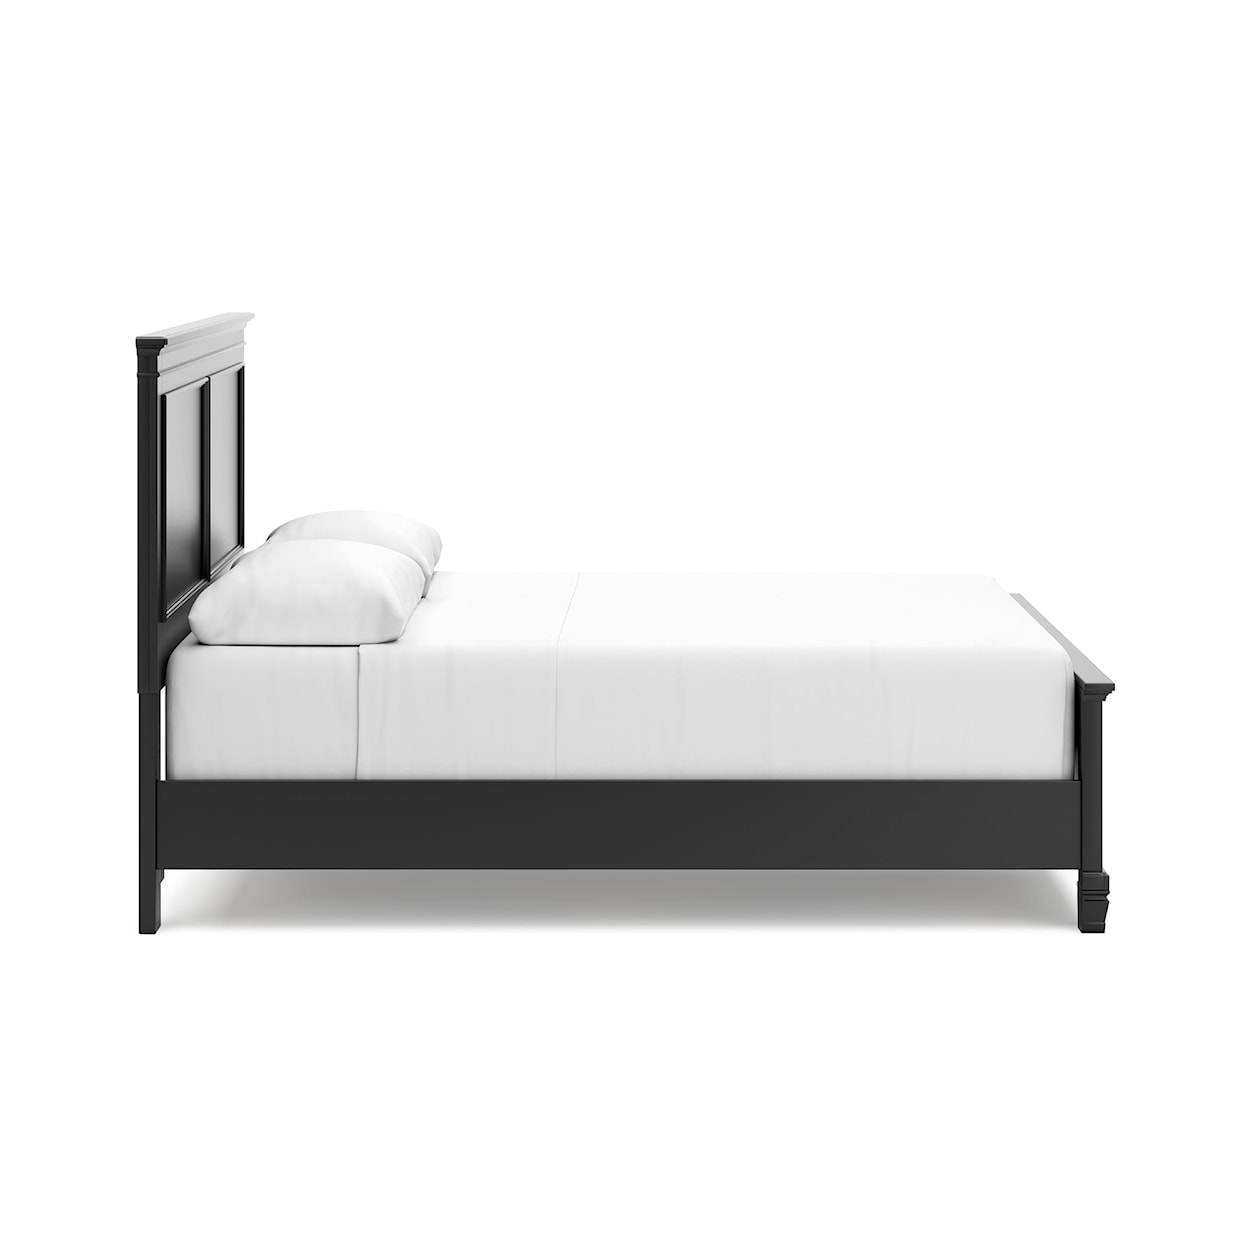 Signature Design by Ashley Lanolee Queen Panel Bed